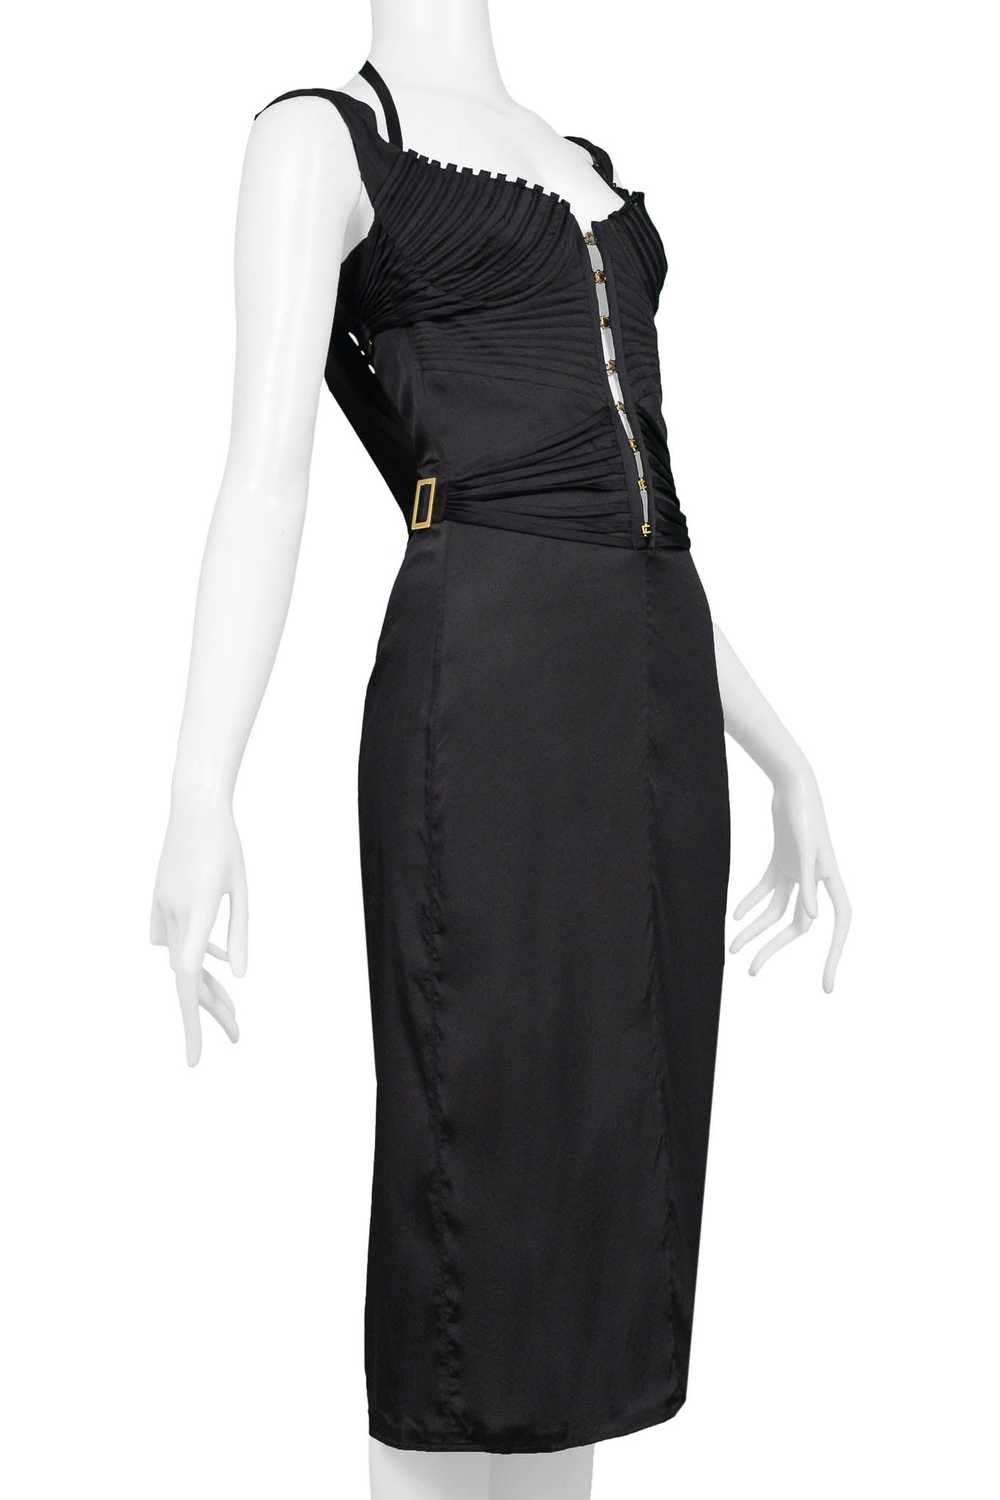 GUCCI BY TOM FORD BLACK CORSET COCKTAIL DRESS 2003 - image 8